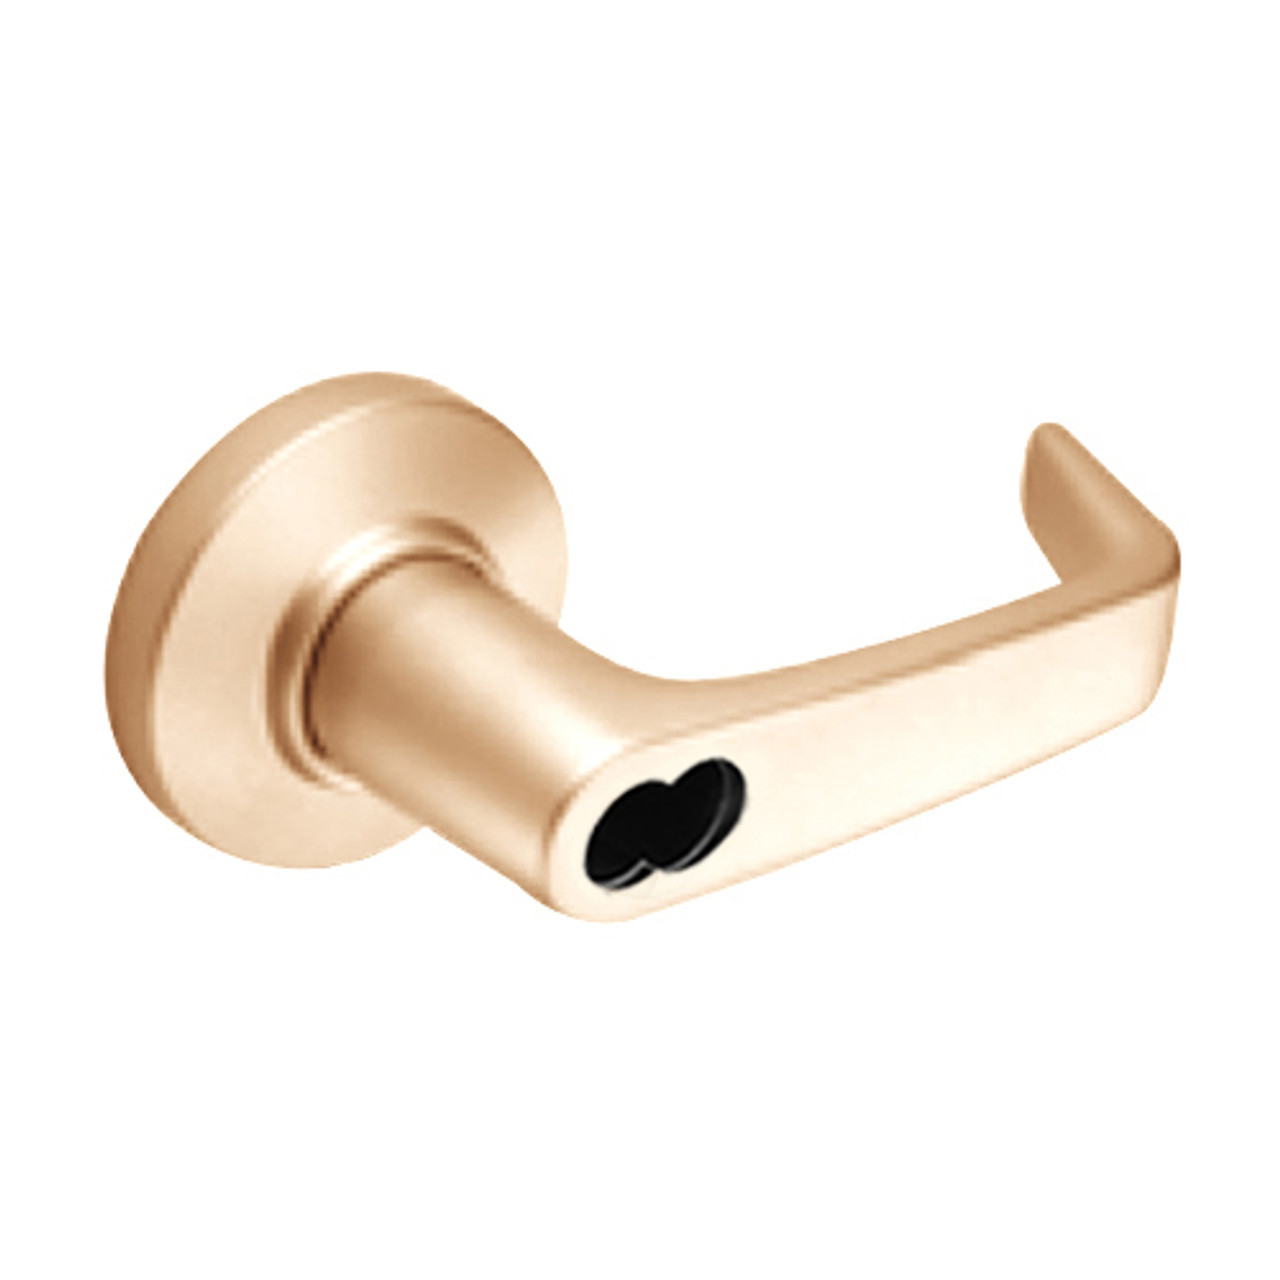 9K37DR15CS3611LM Best 9K Series Special Function Cylindrical Lever Locks with Contour Angle with Return Lever Design Accept 7 Pin Best Core in Bright Bronze